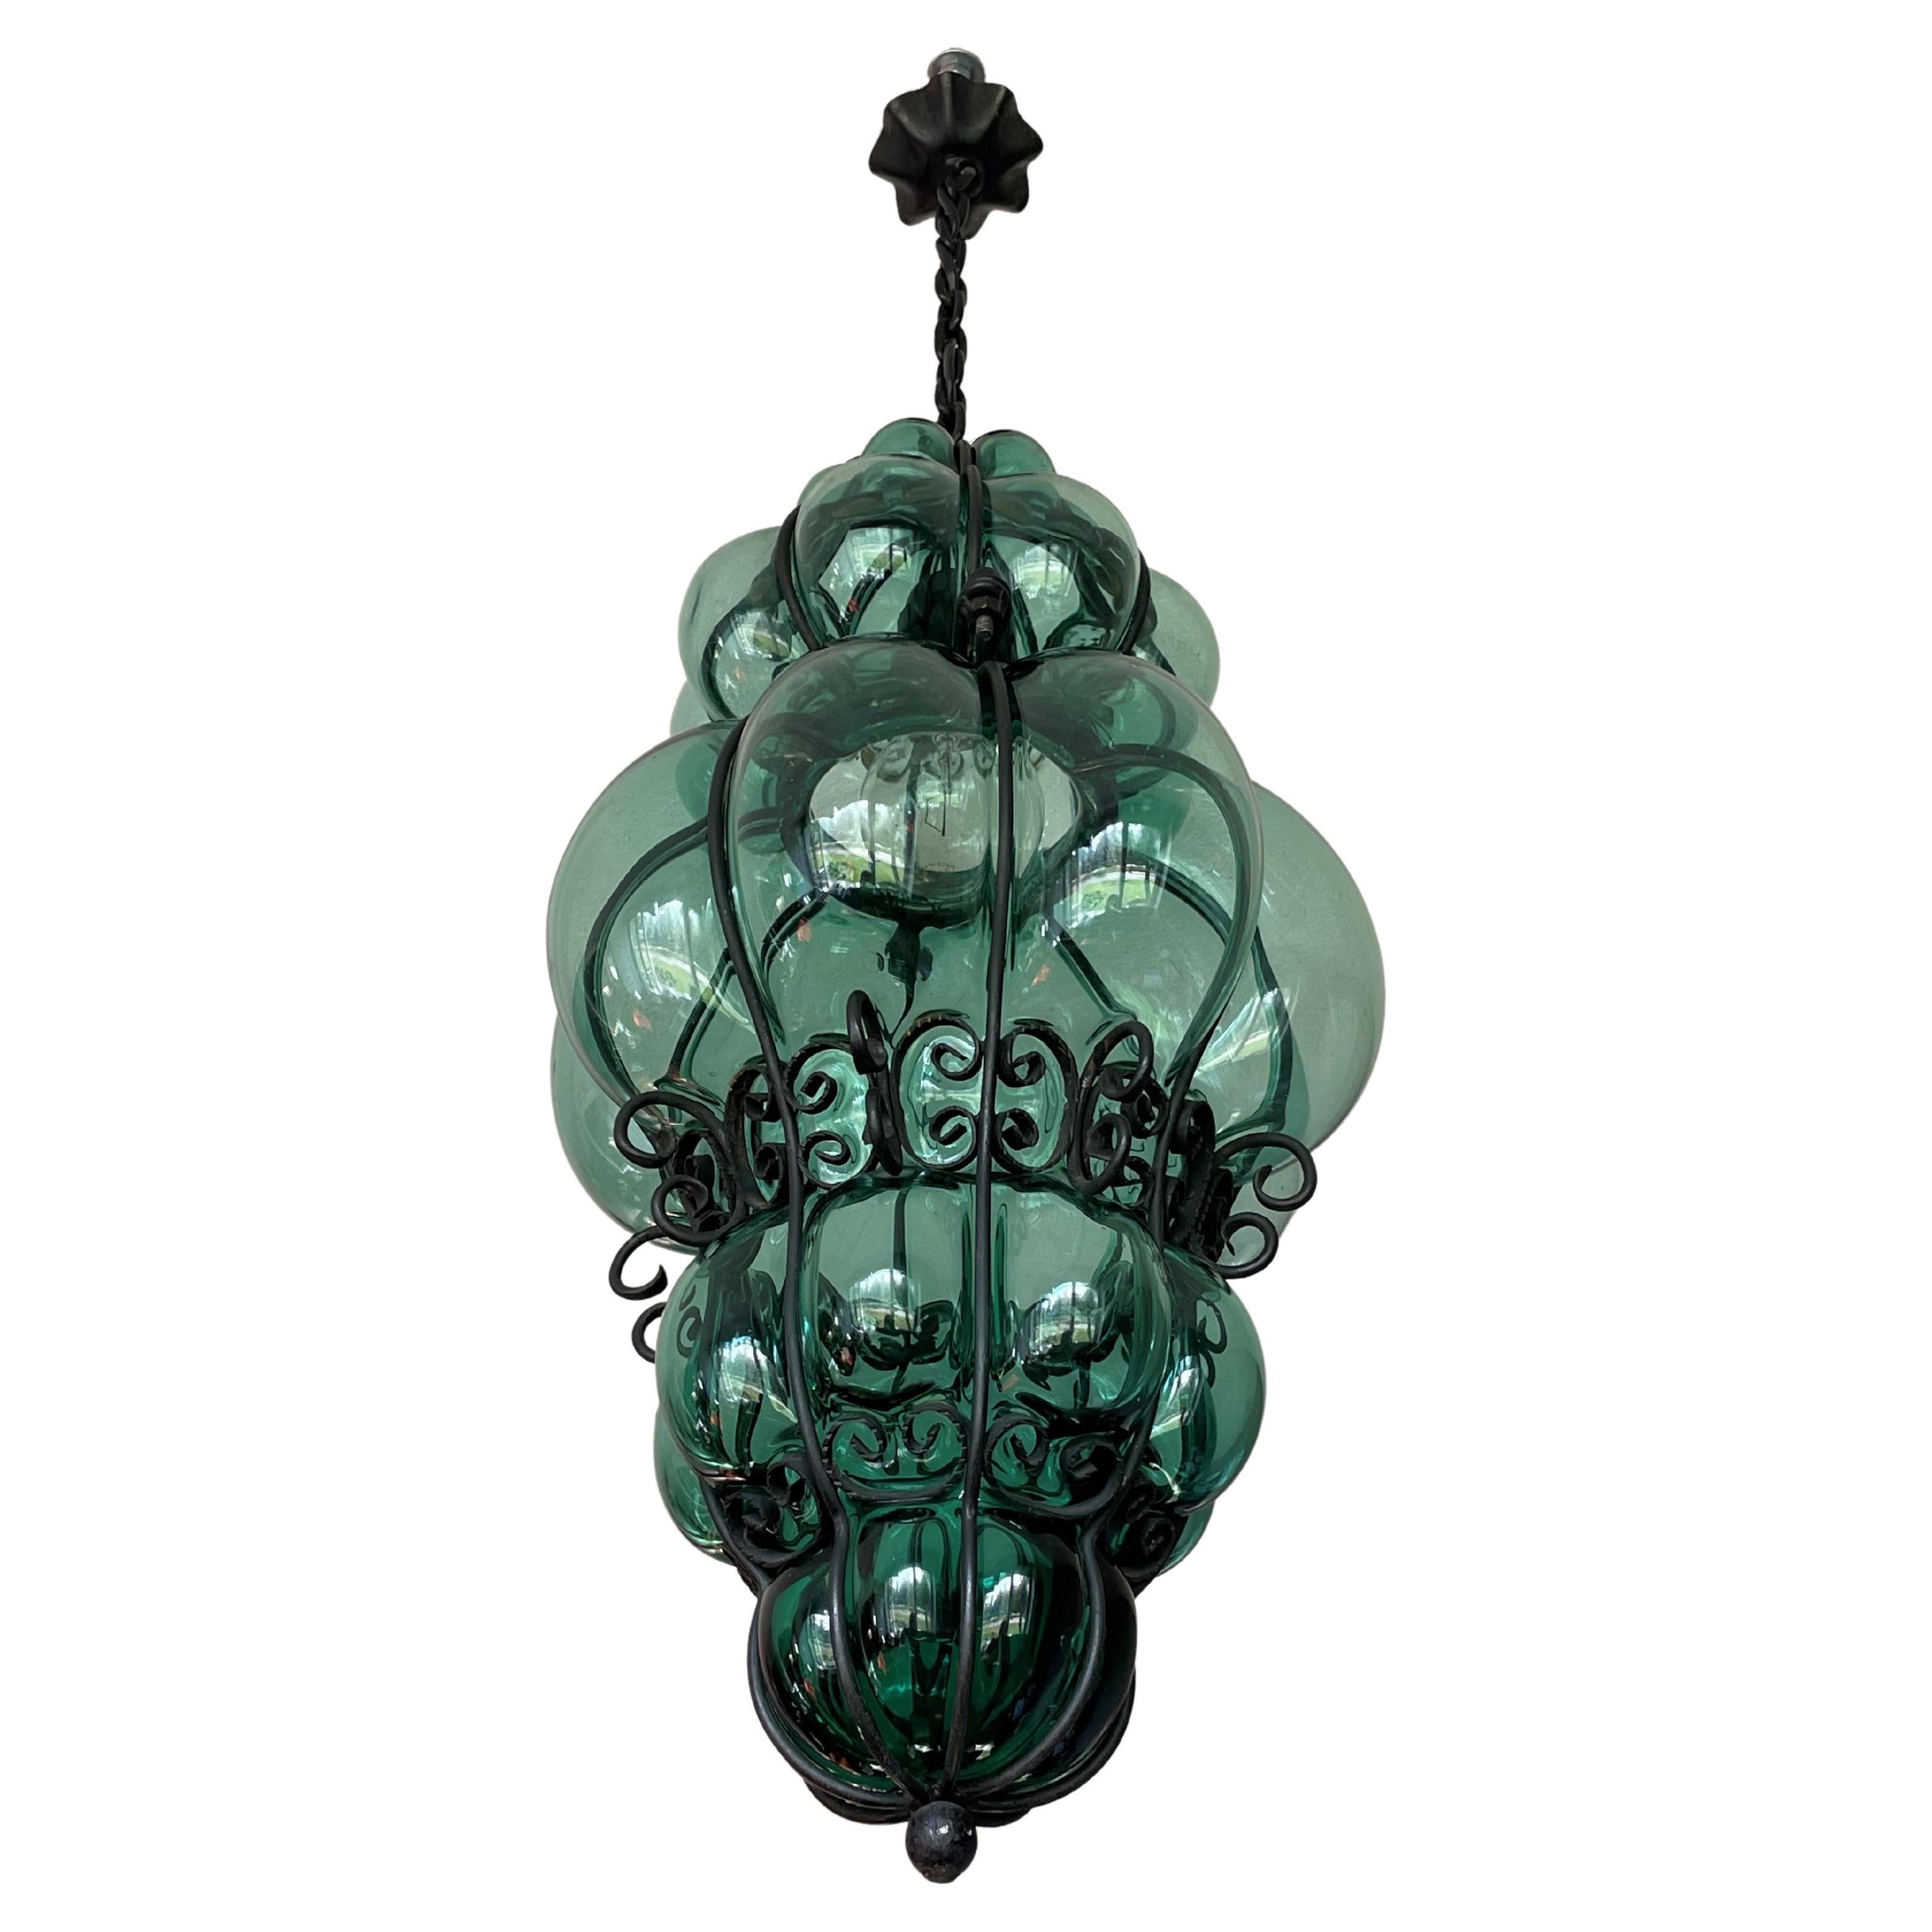 Awesome Venetian Murano Pendant Light w. Mouth Blown Bluish Green Glass in Frame